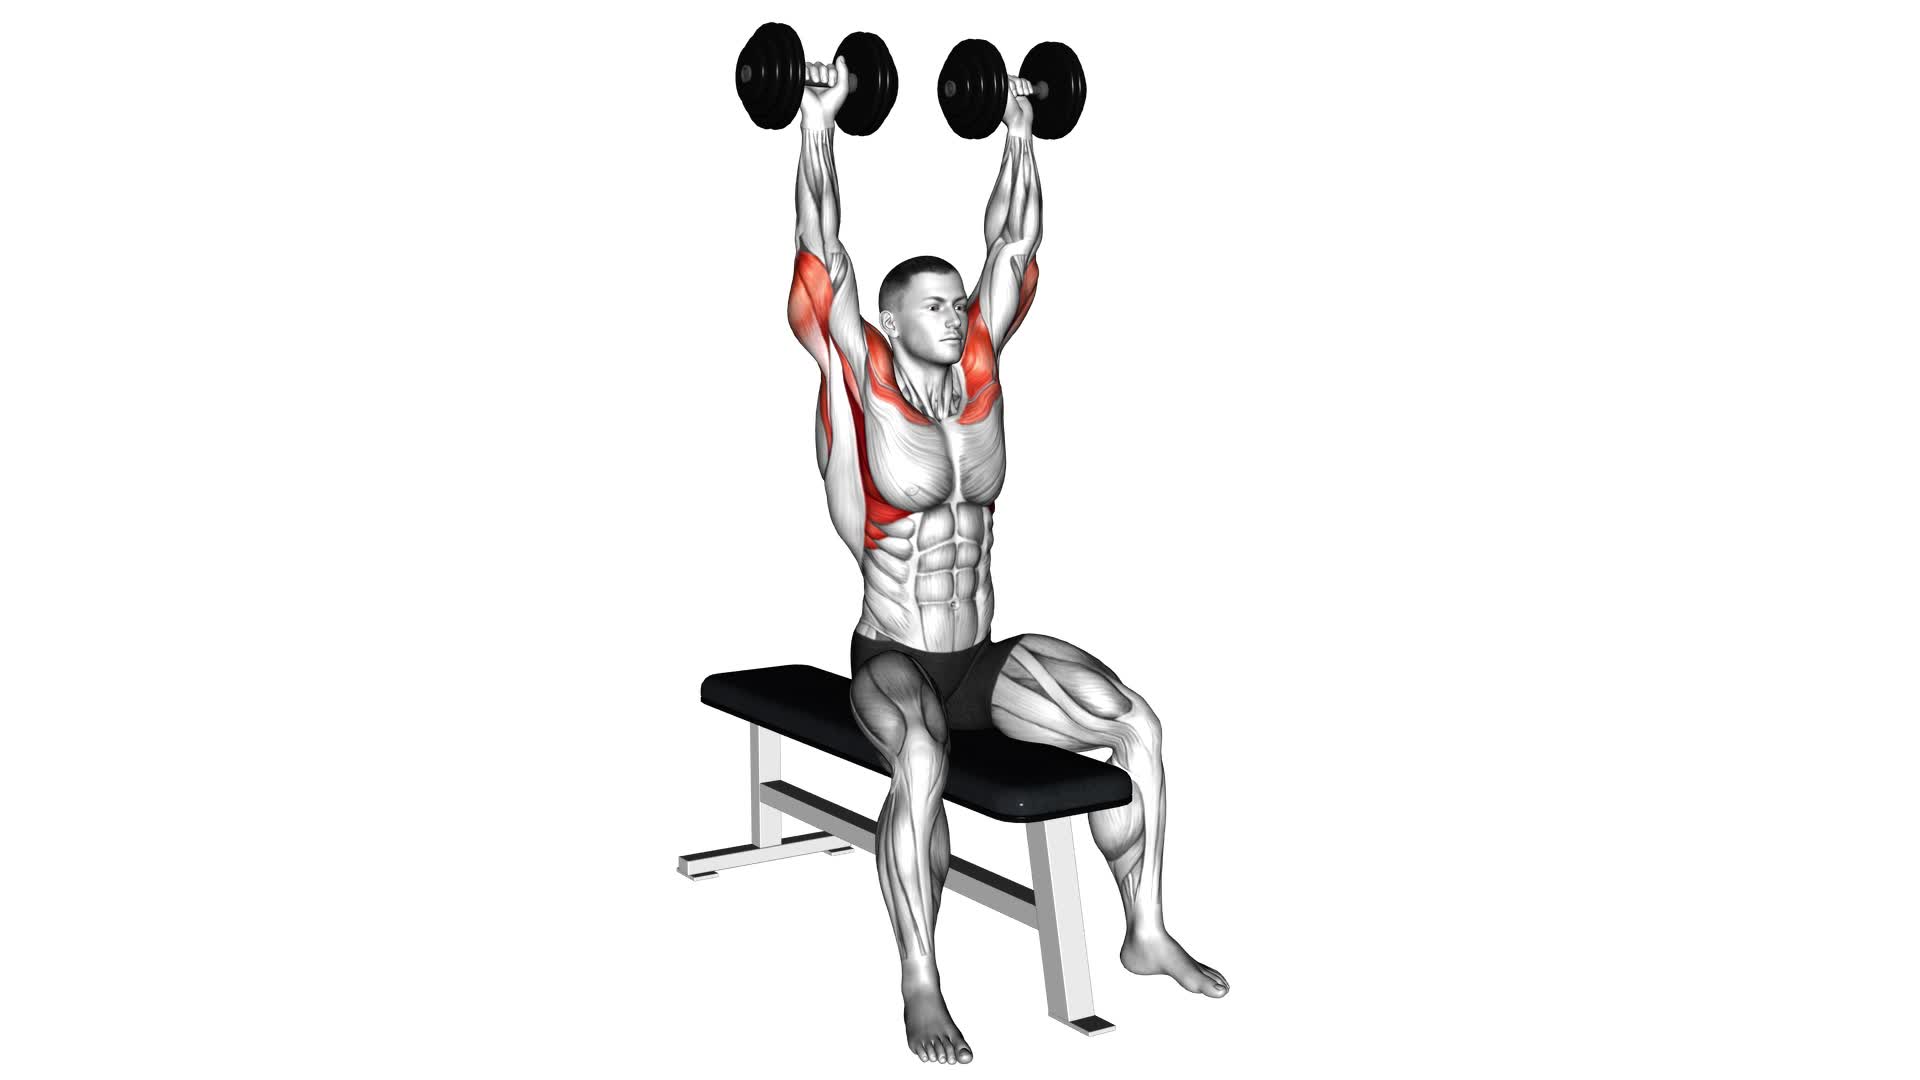 Dumbbell Bench Seated Press - Video Exercise Guide & Tips